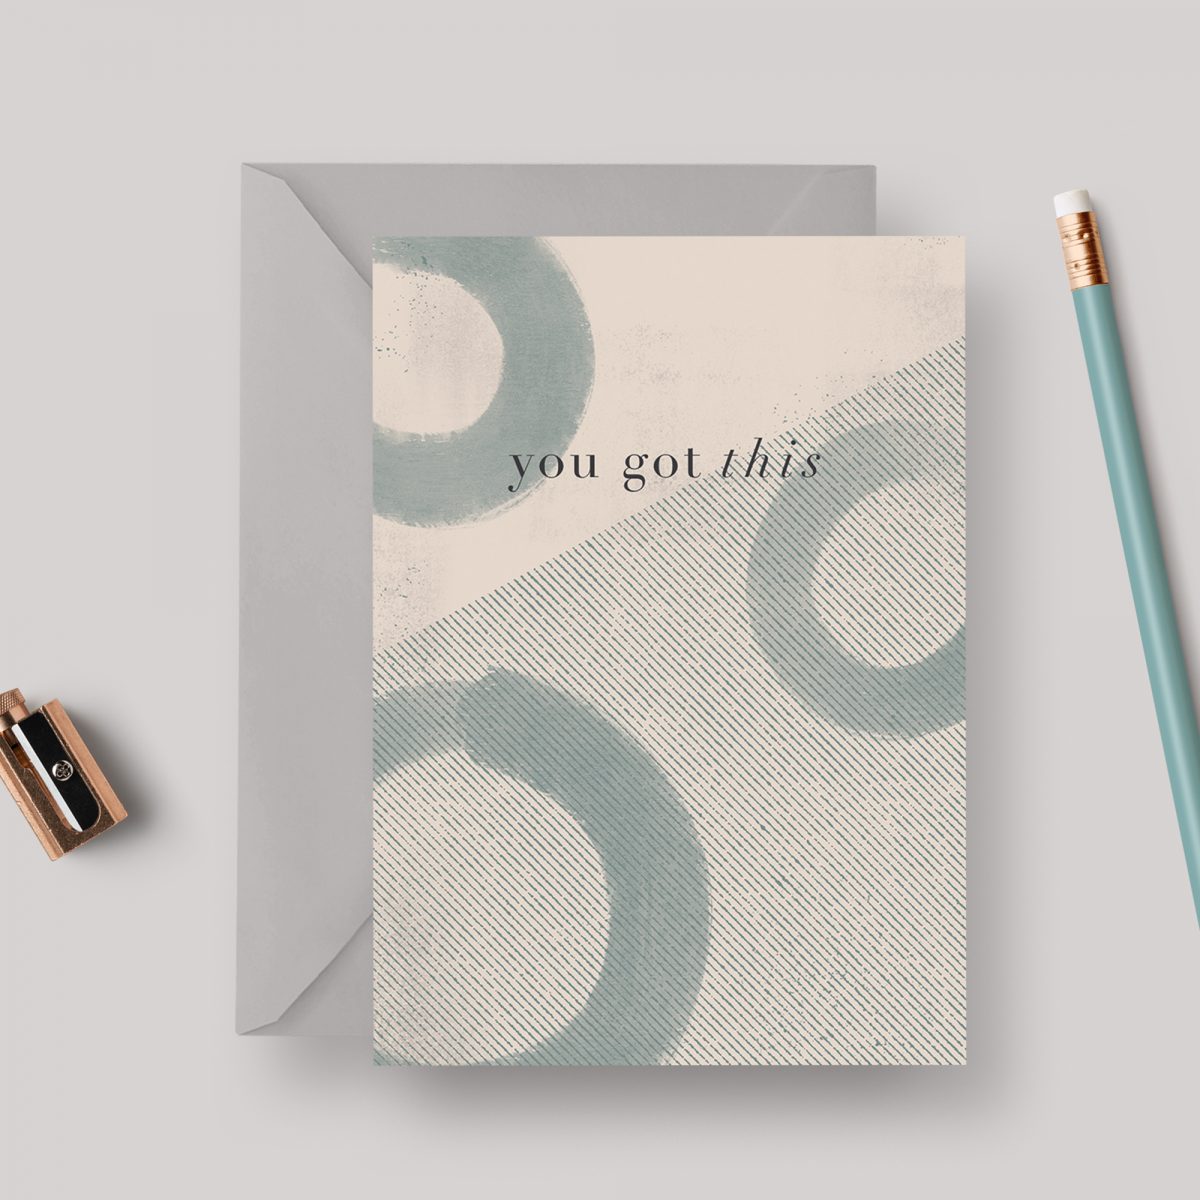 You Got This A6 greeting card with grey envelope